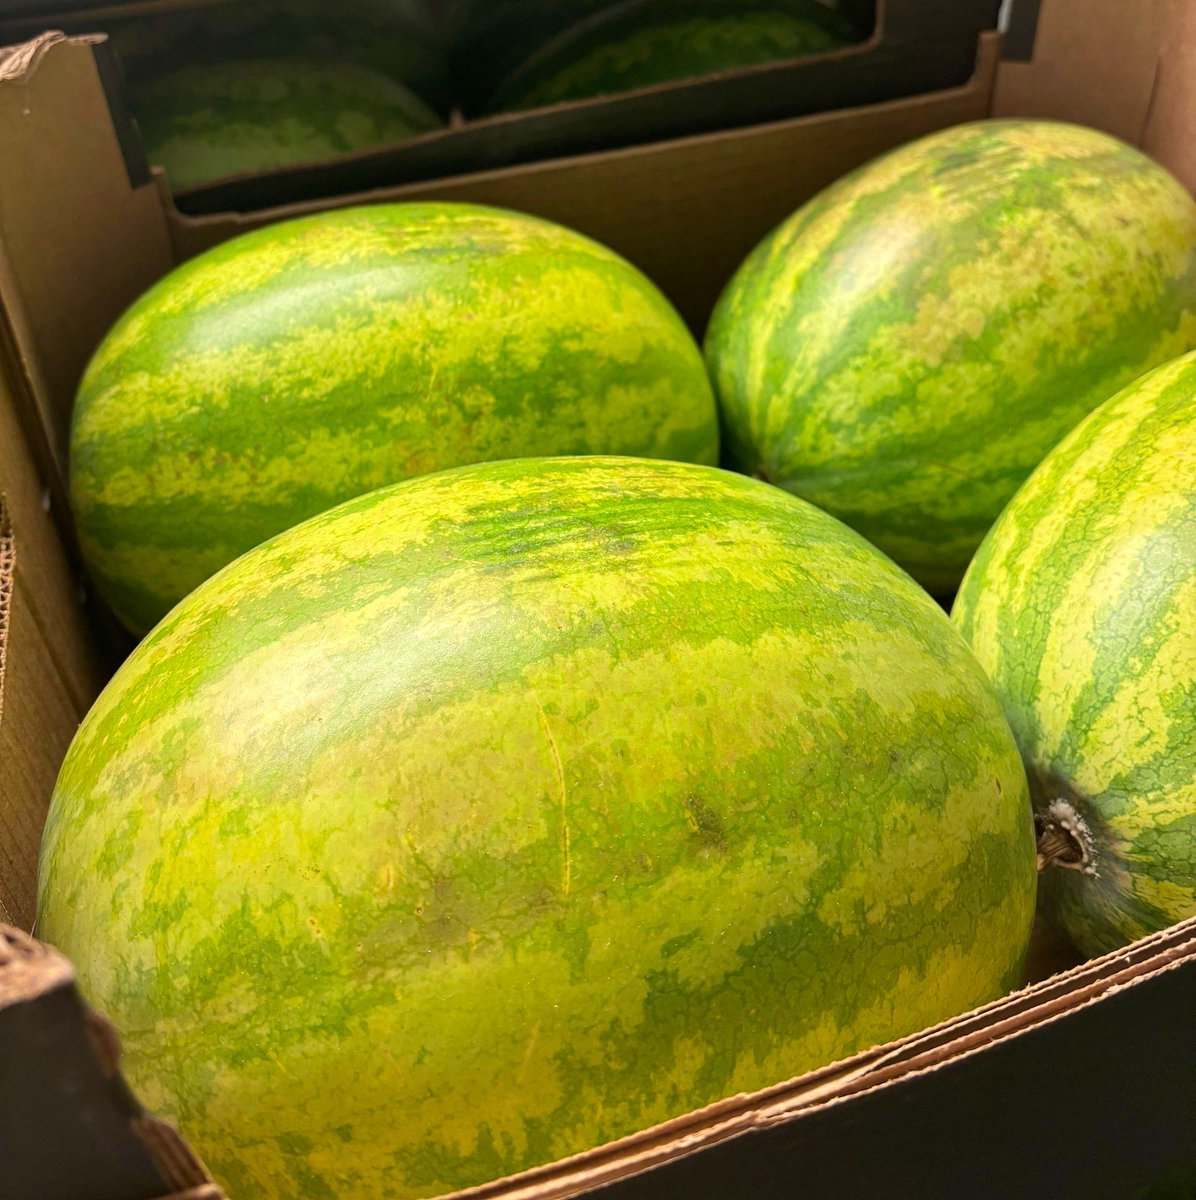 We carried a watermelon! 🍉 💃 They may be bigger than their fellow melon relatives, but they come with a big variety for delicious dishes! You can create salsa, yogurt, smoothies, fruit salads, ice lollies, noodle salads, jelly or even just eat them as a snack on their own.